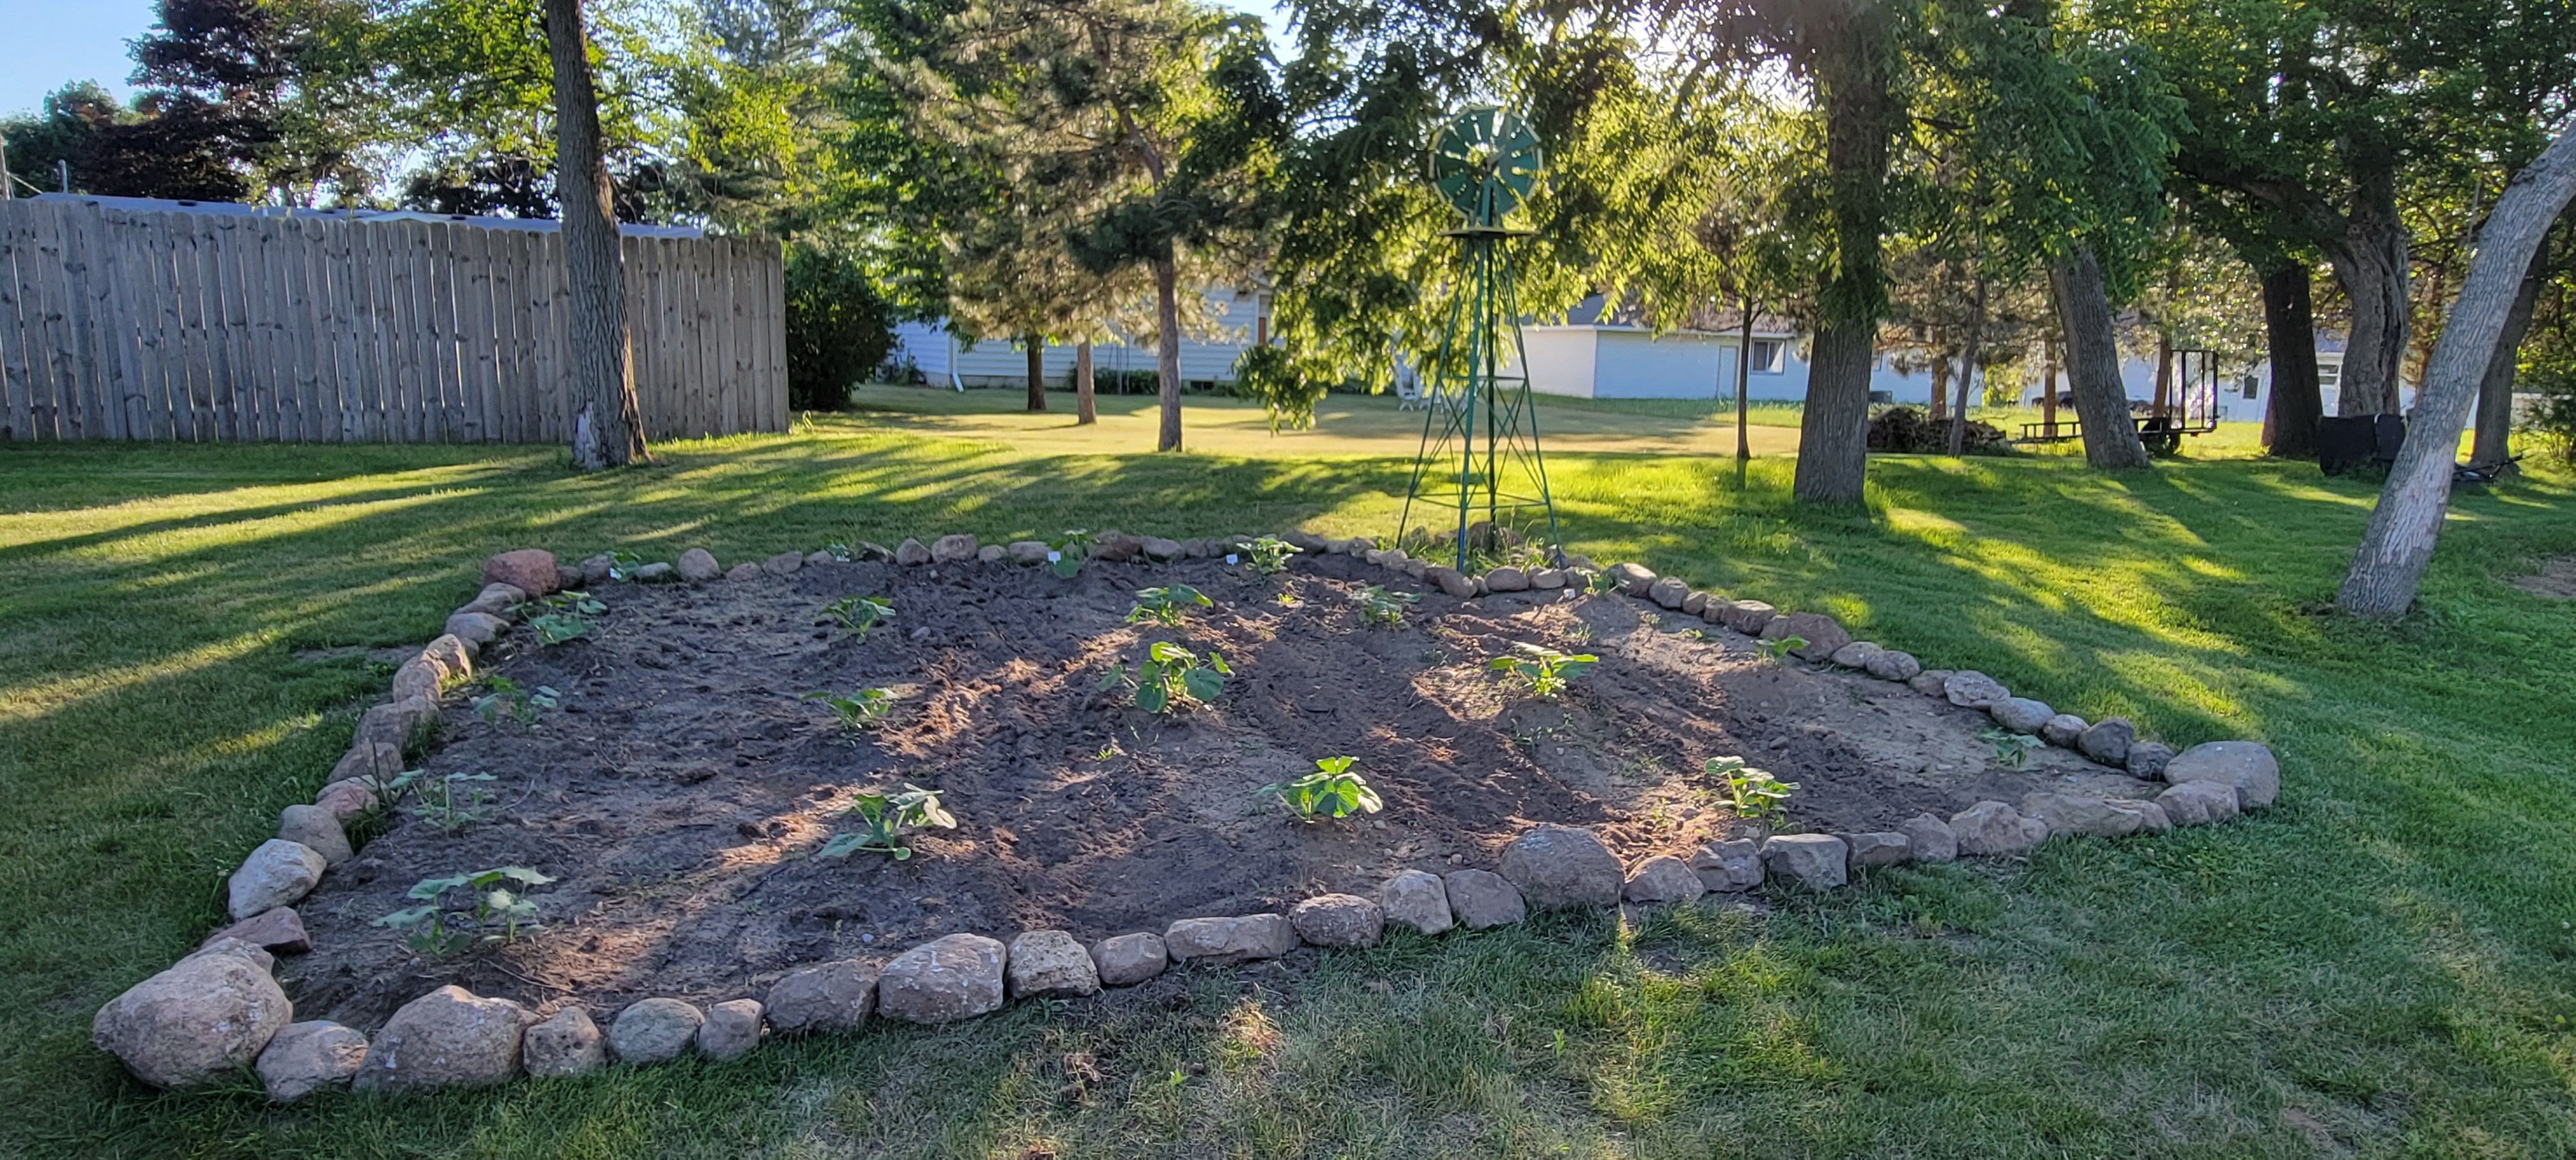 We have a pumpkin patch in our back yard. We plan to try and grow other things too.